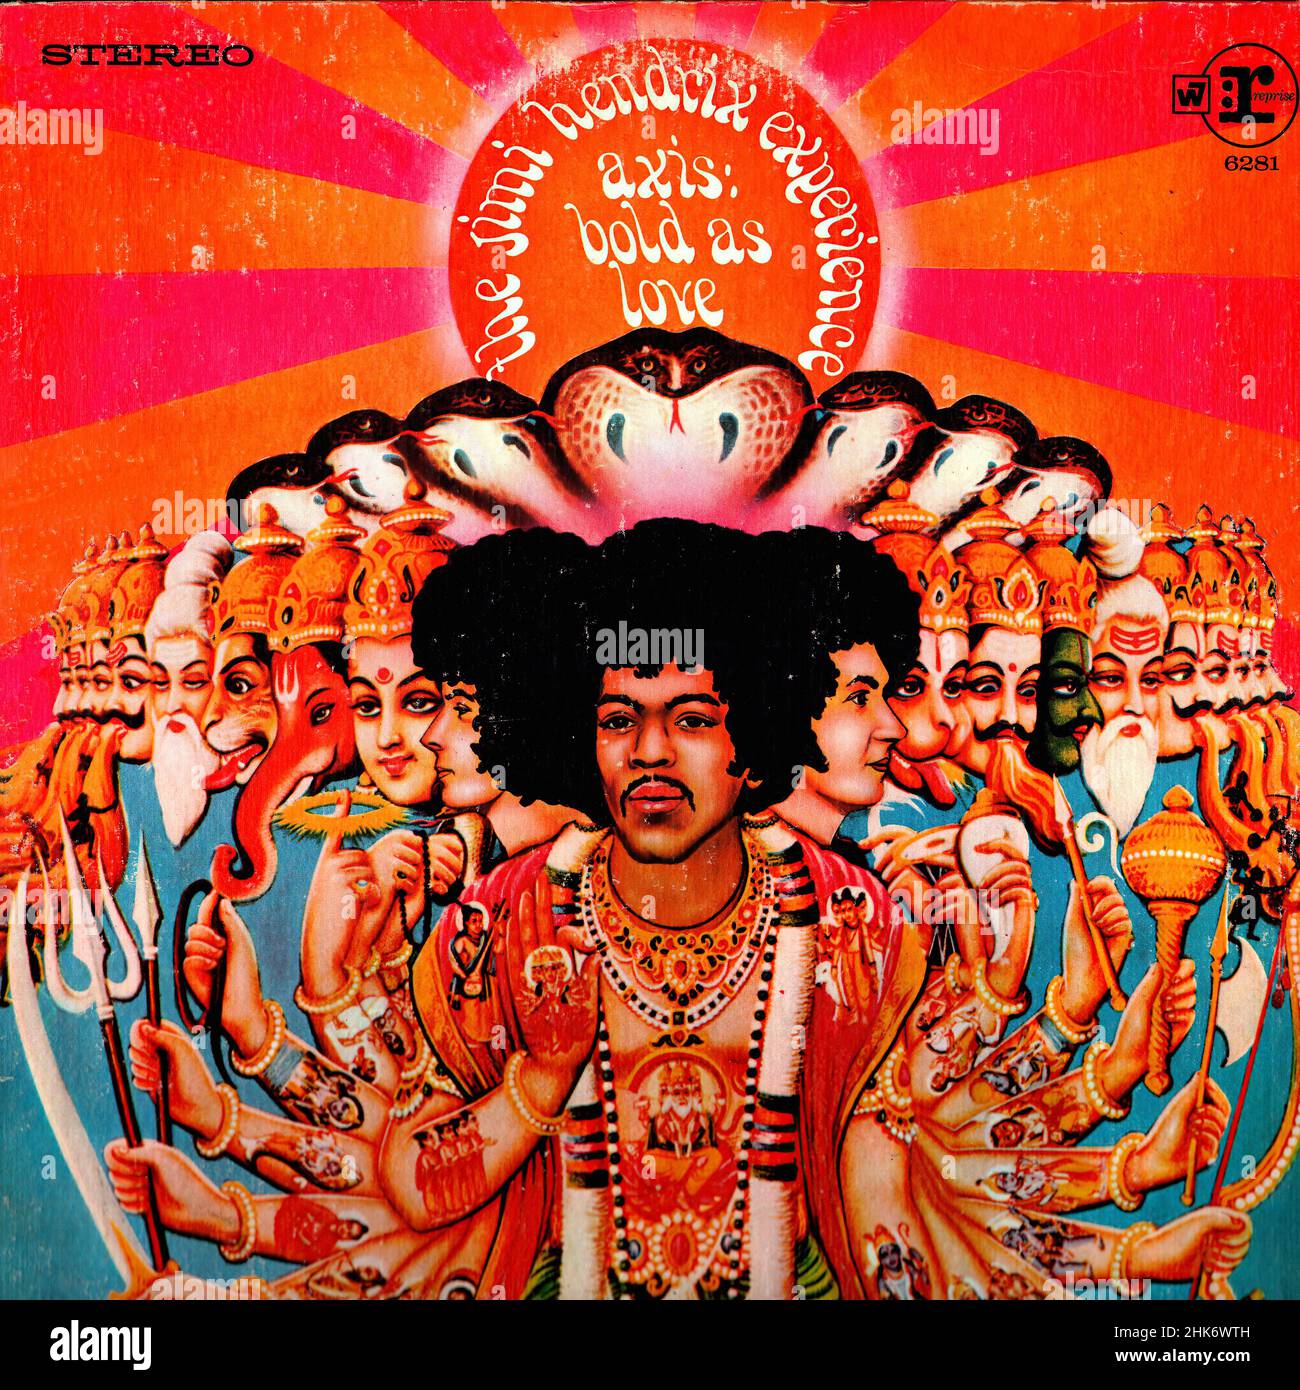 Vintage vinyl record cover - Hendrix, Jimmy - Axis Bold As Love - US 1967  Stock Photo - Alamy